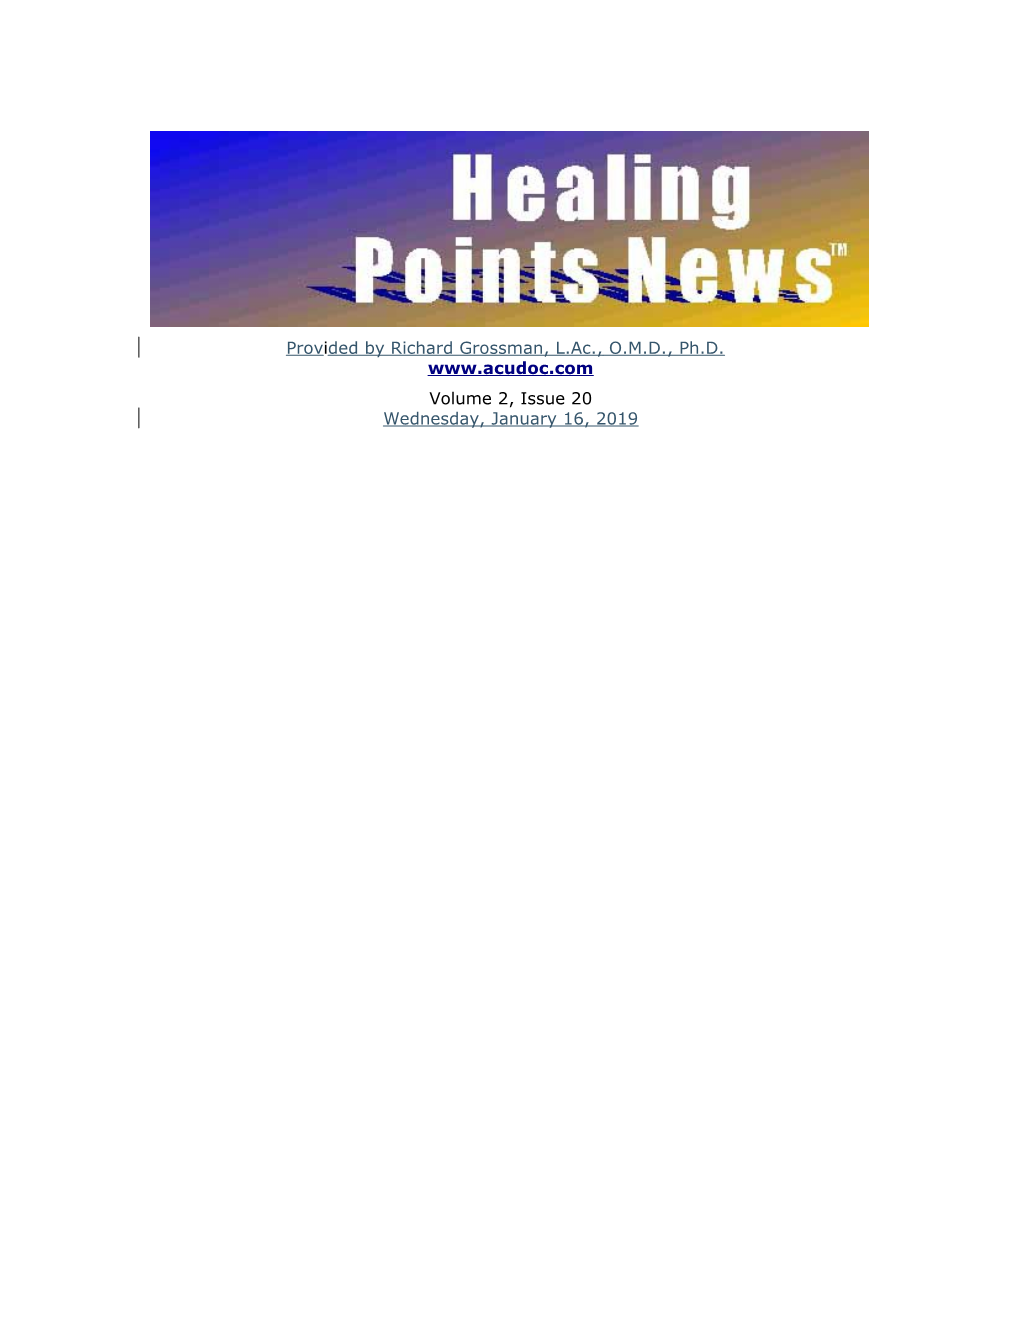 Share Healing Points with Family and Friends